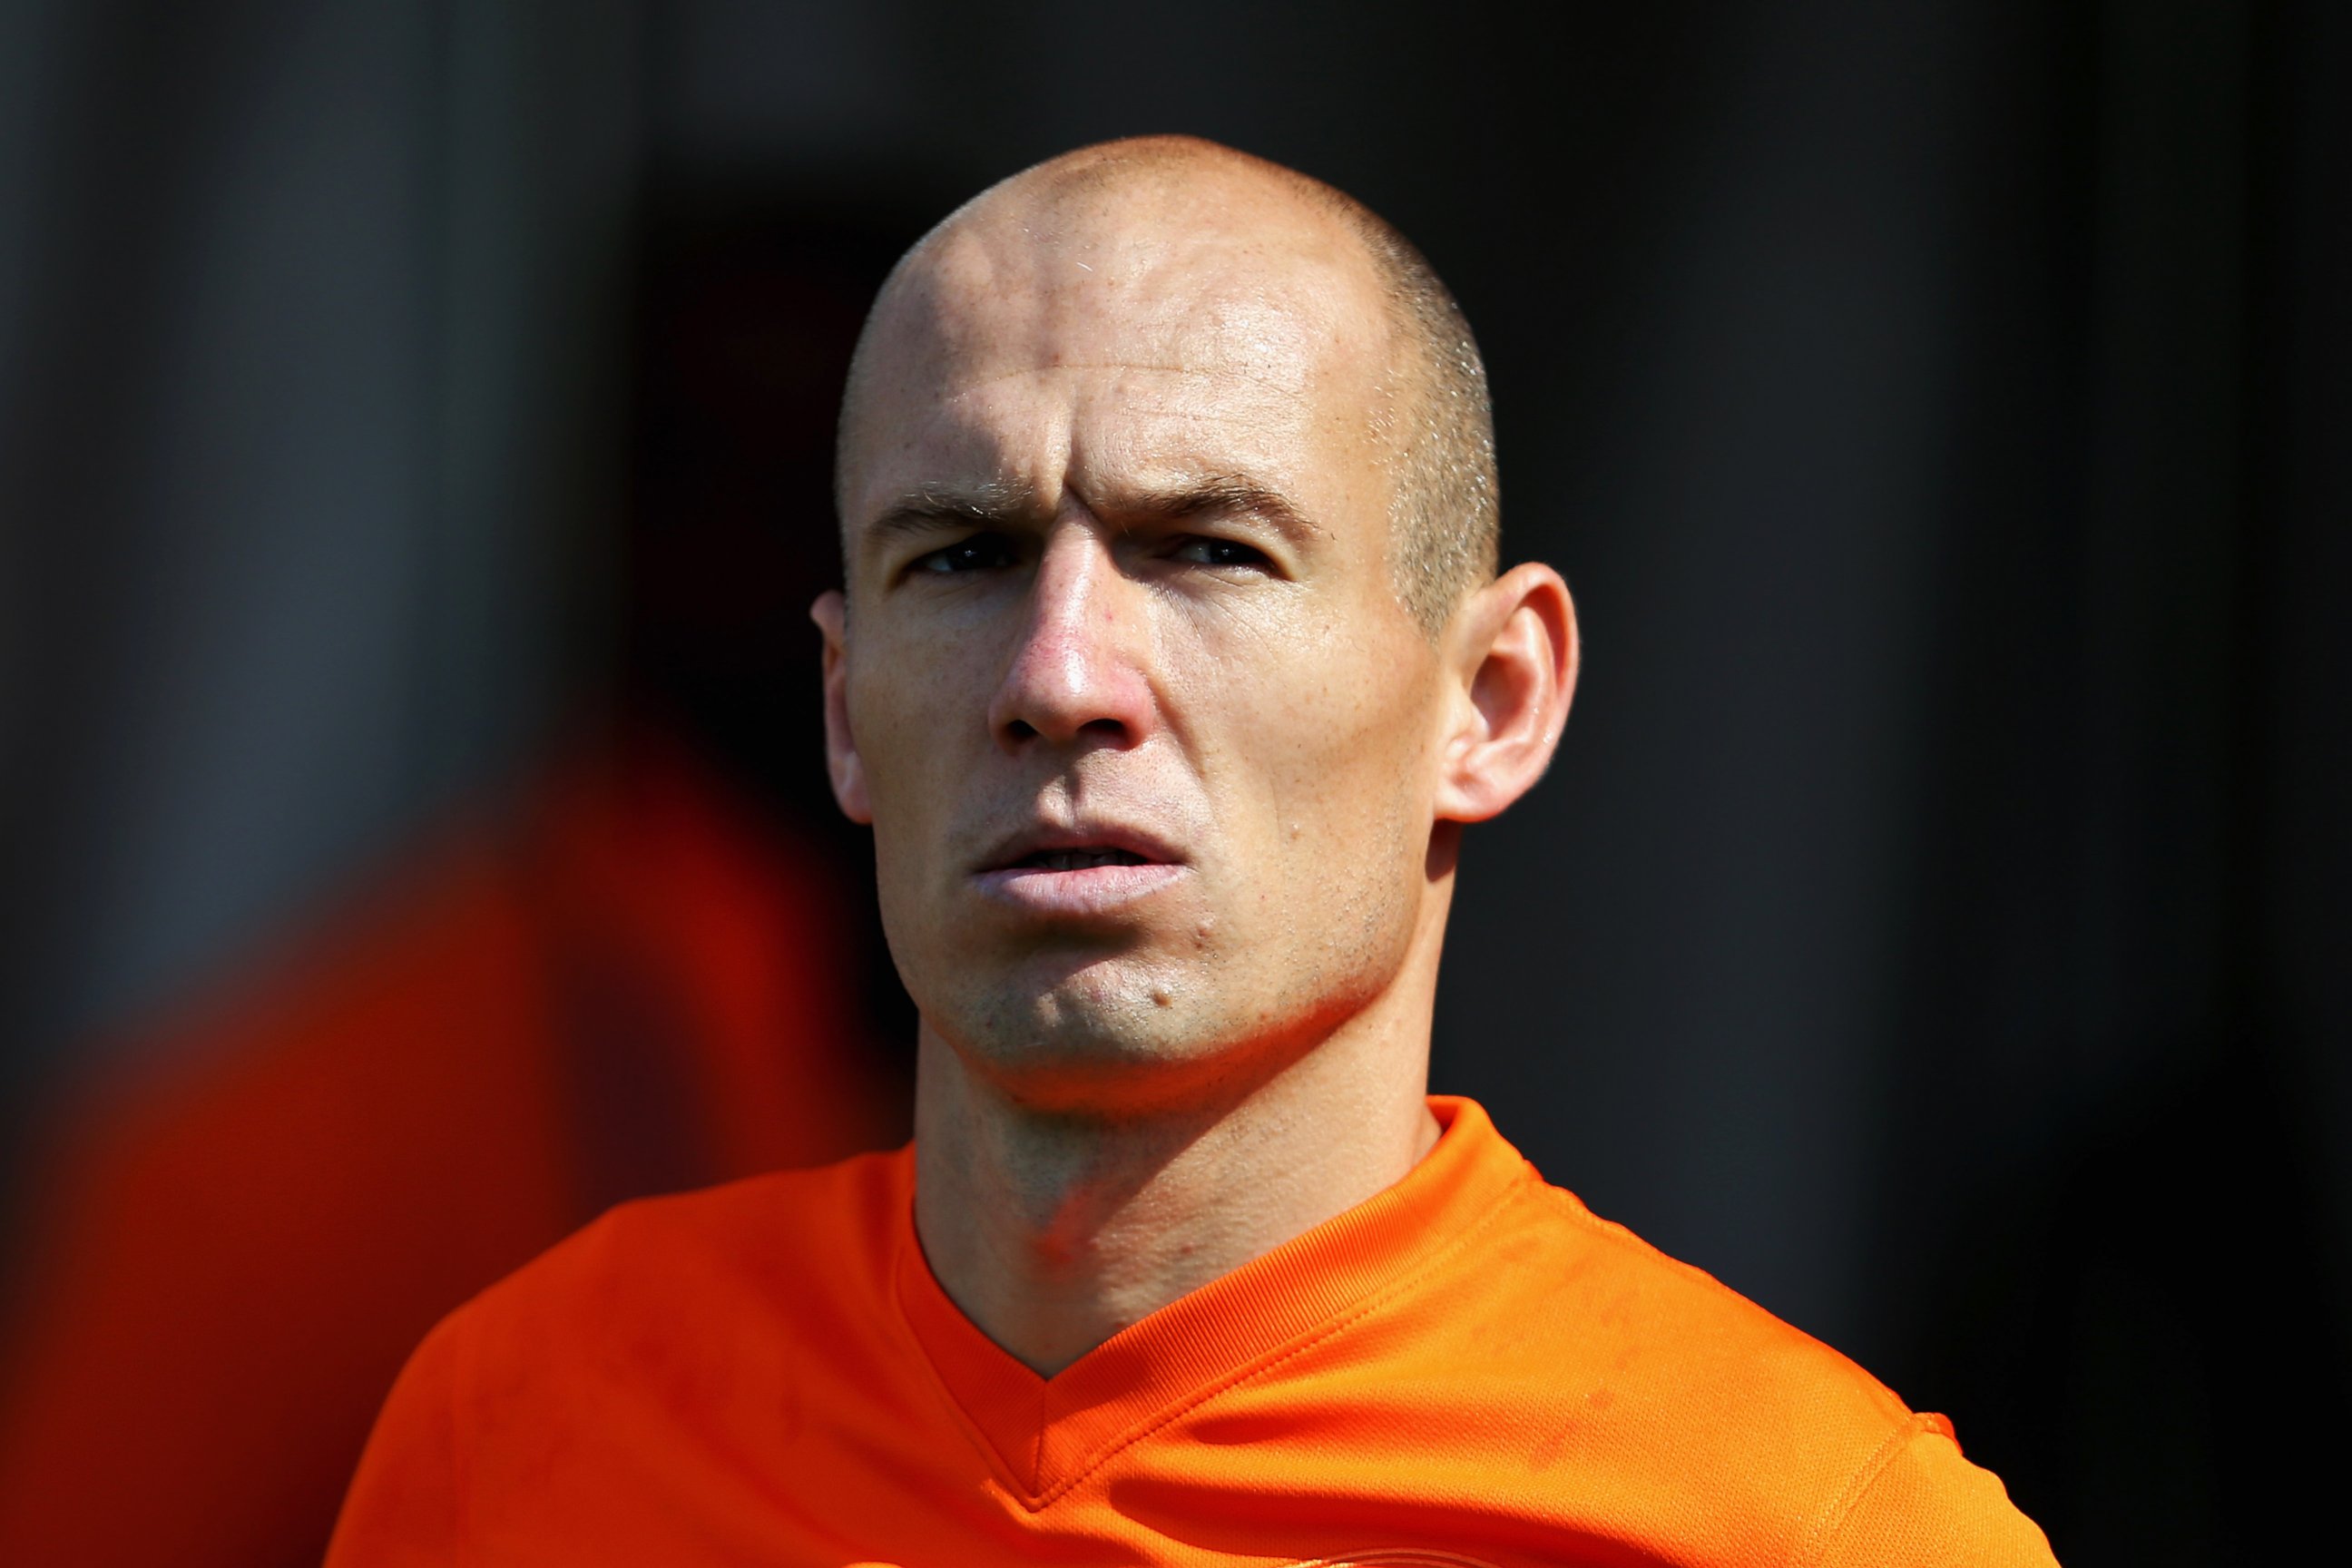 PHOTO: Arjen Robben of the Netherlands is seen during the 2014 FIFA World Cup Brazil Group B match between the Netherlands and Chile at Arena de Sao Paulo on June 23, 2014 in Sao Paulo, Brazil